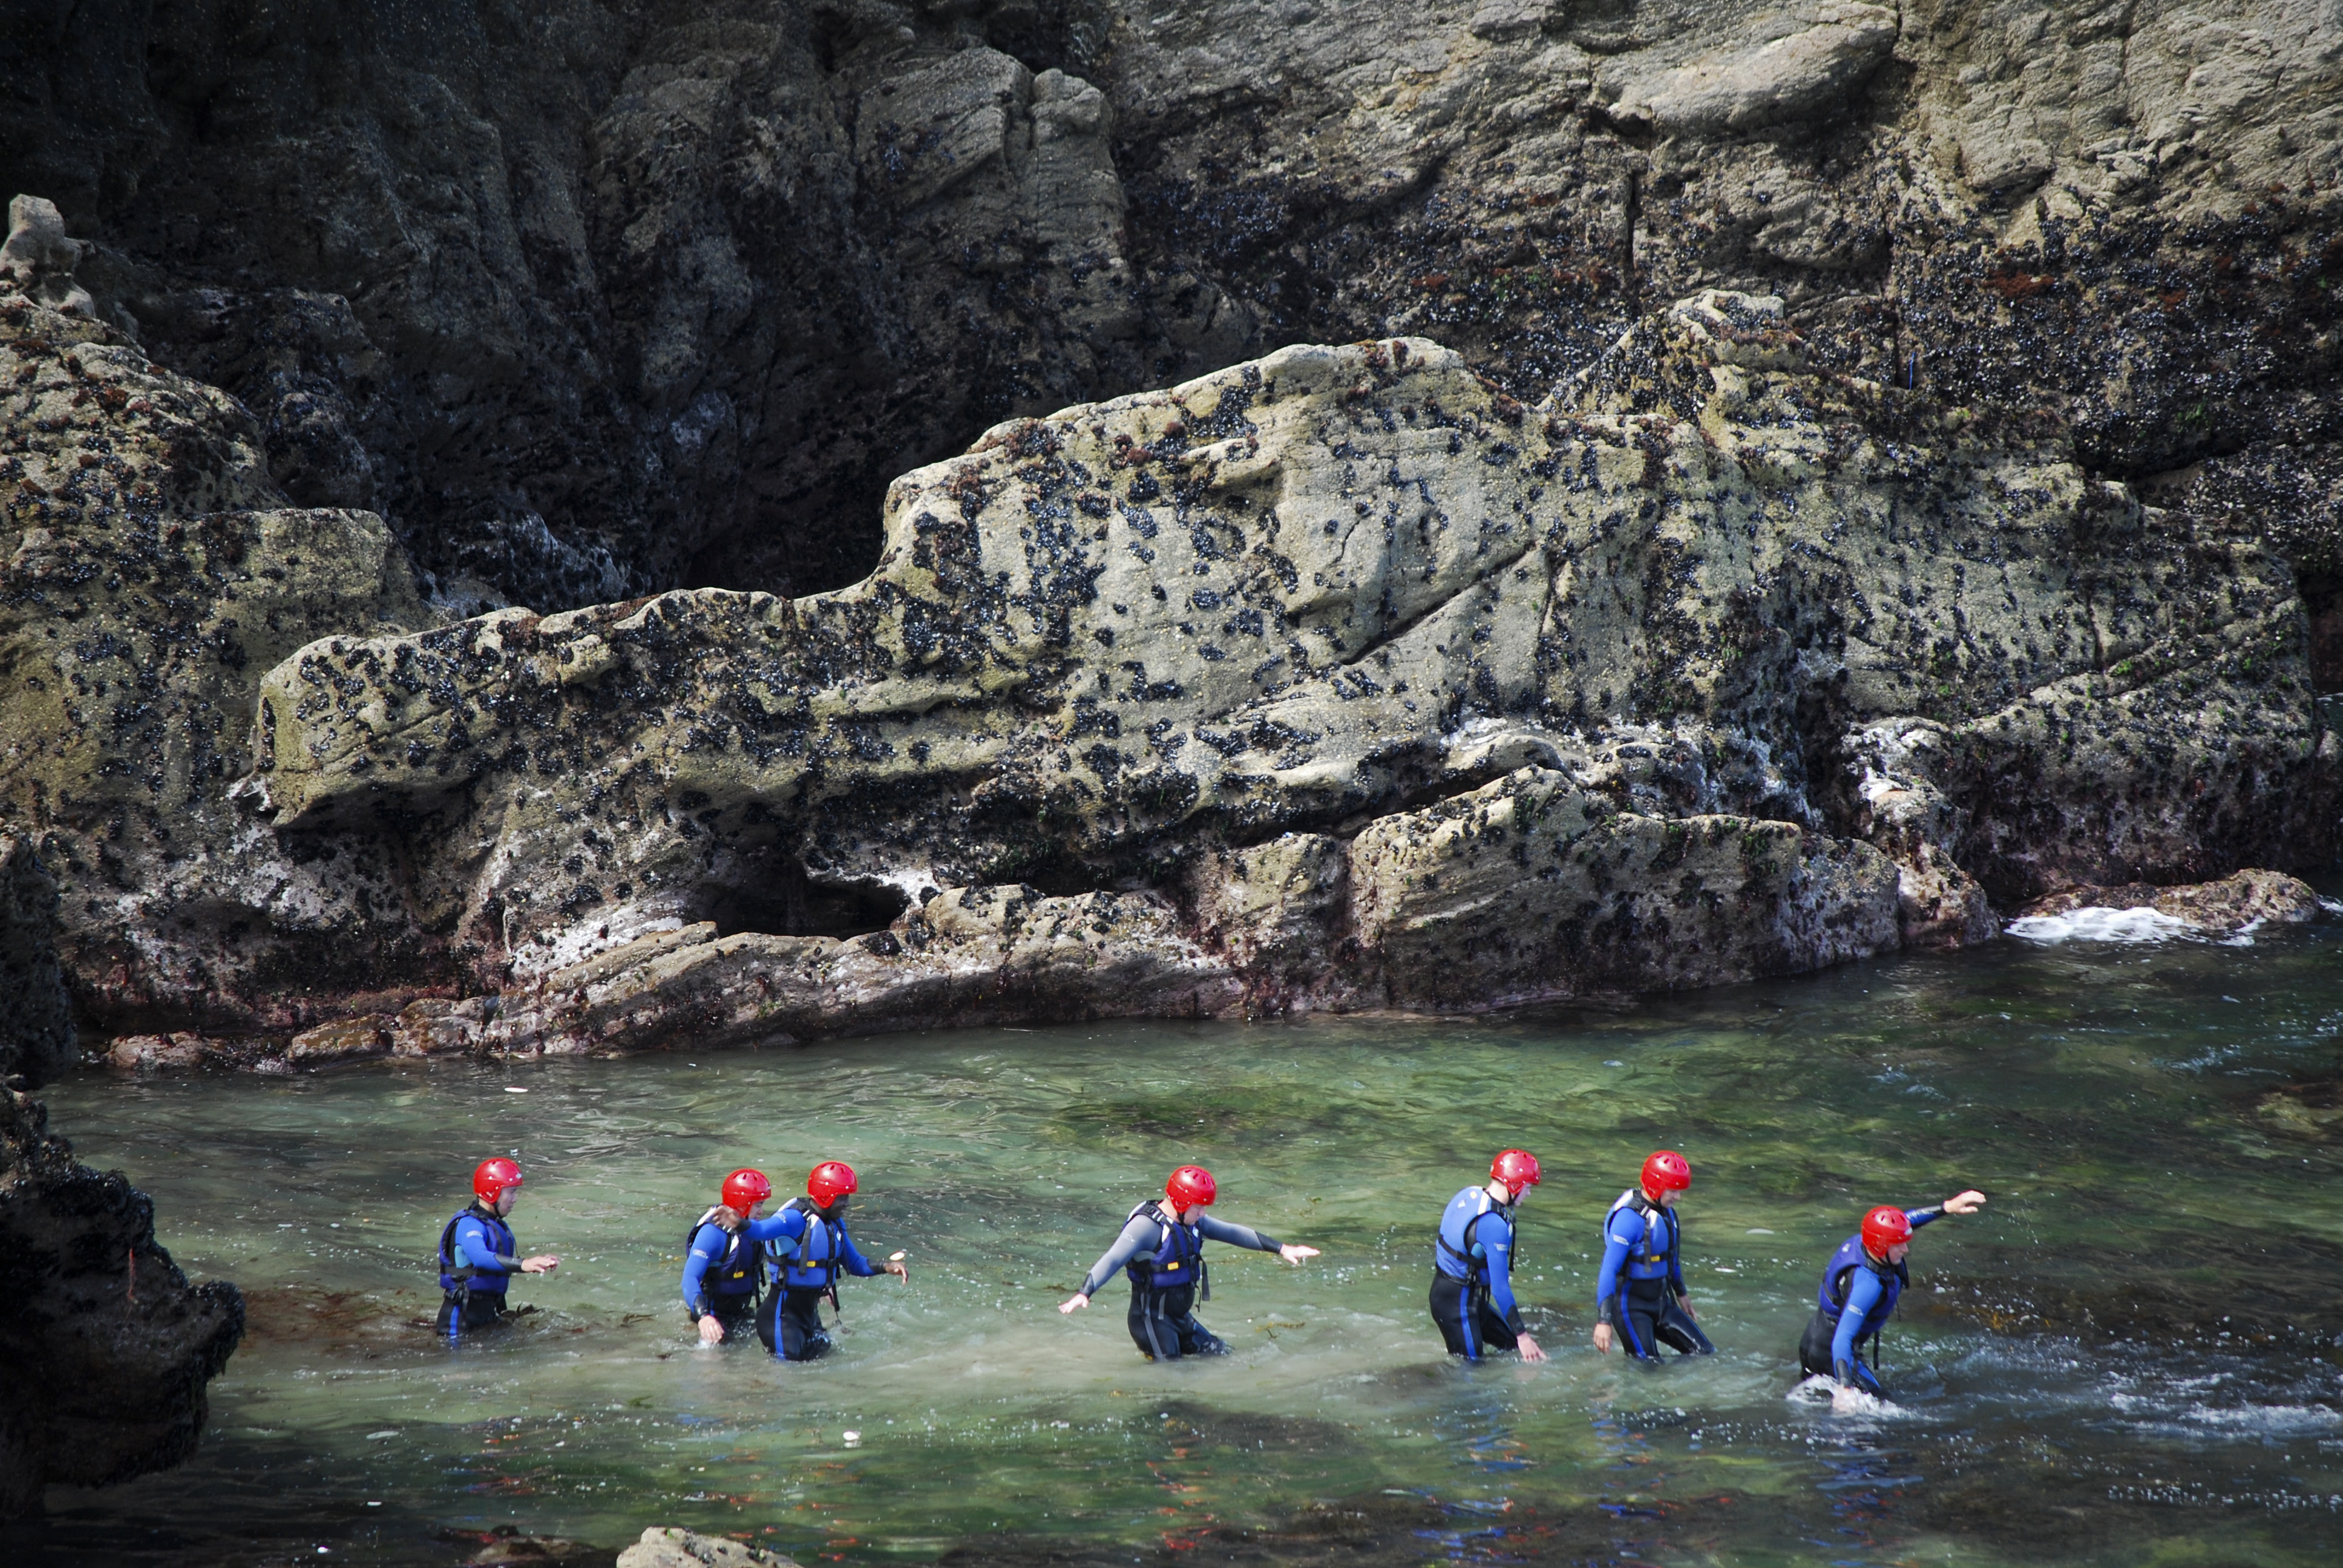 Coasteering in Newquay is a lot of fun with a group
